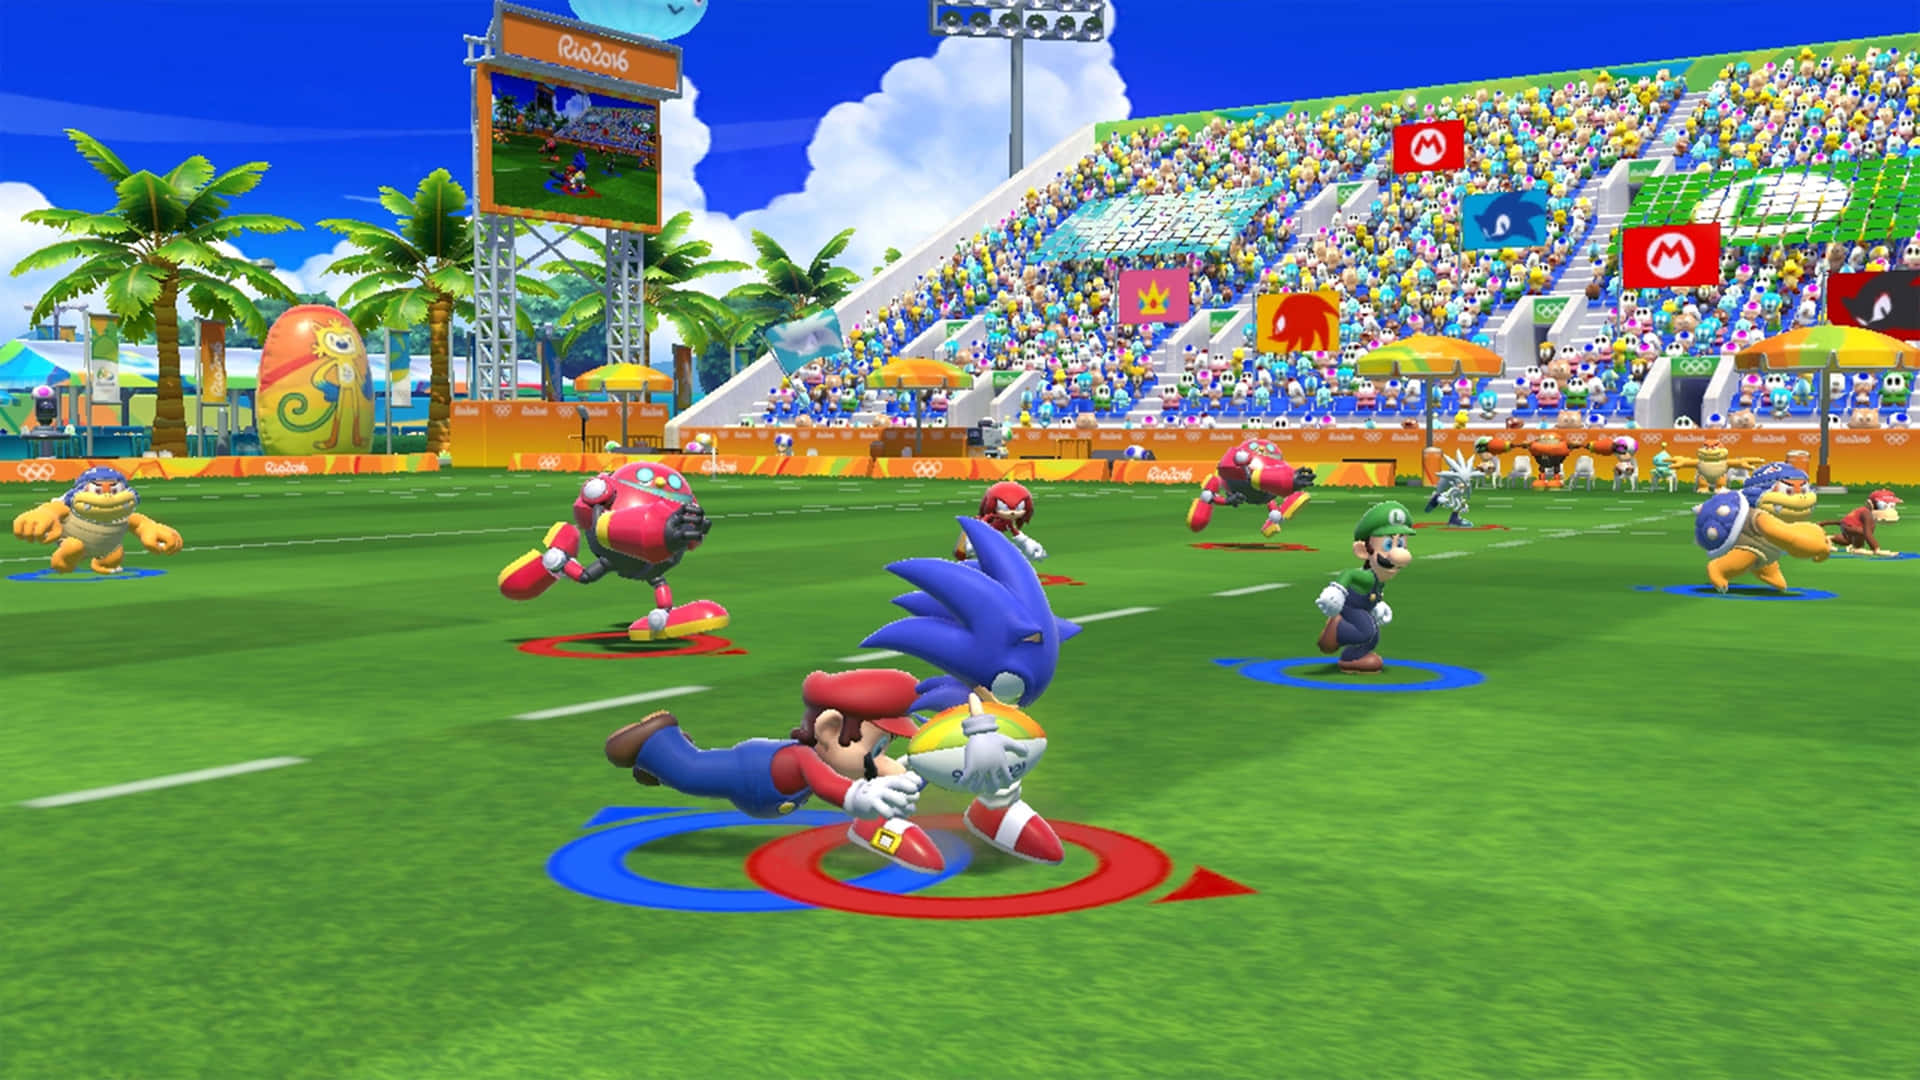 Mario And Sonic At The Olympic Games 3840 X 2160 Wallpaper Wallpaper